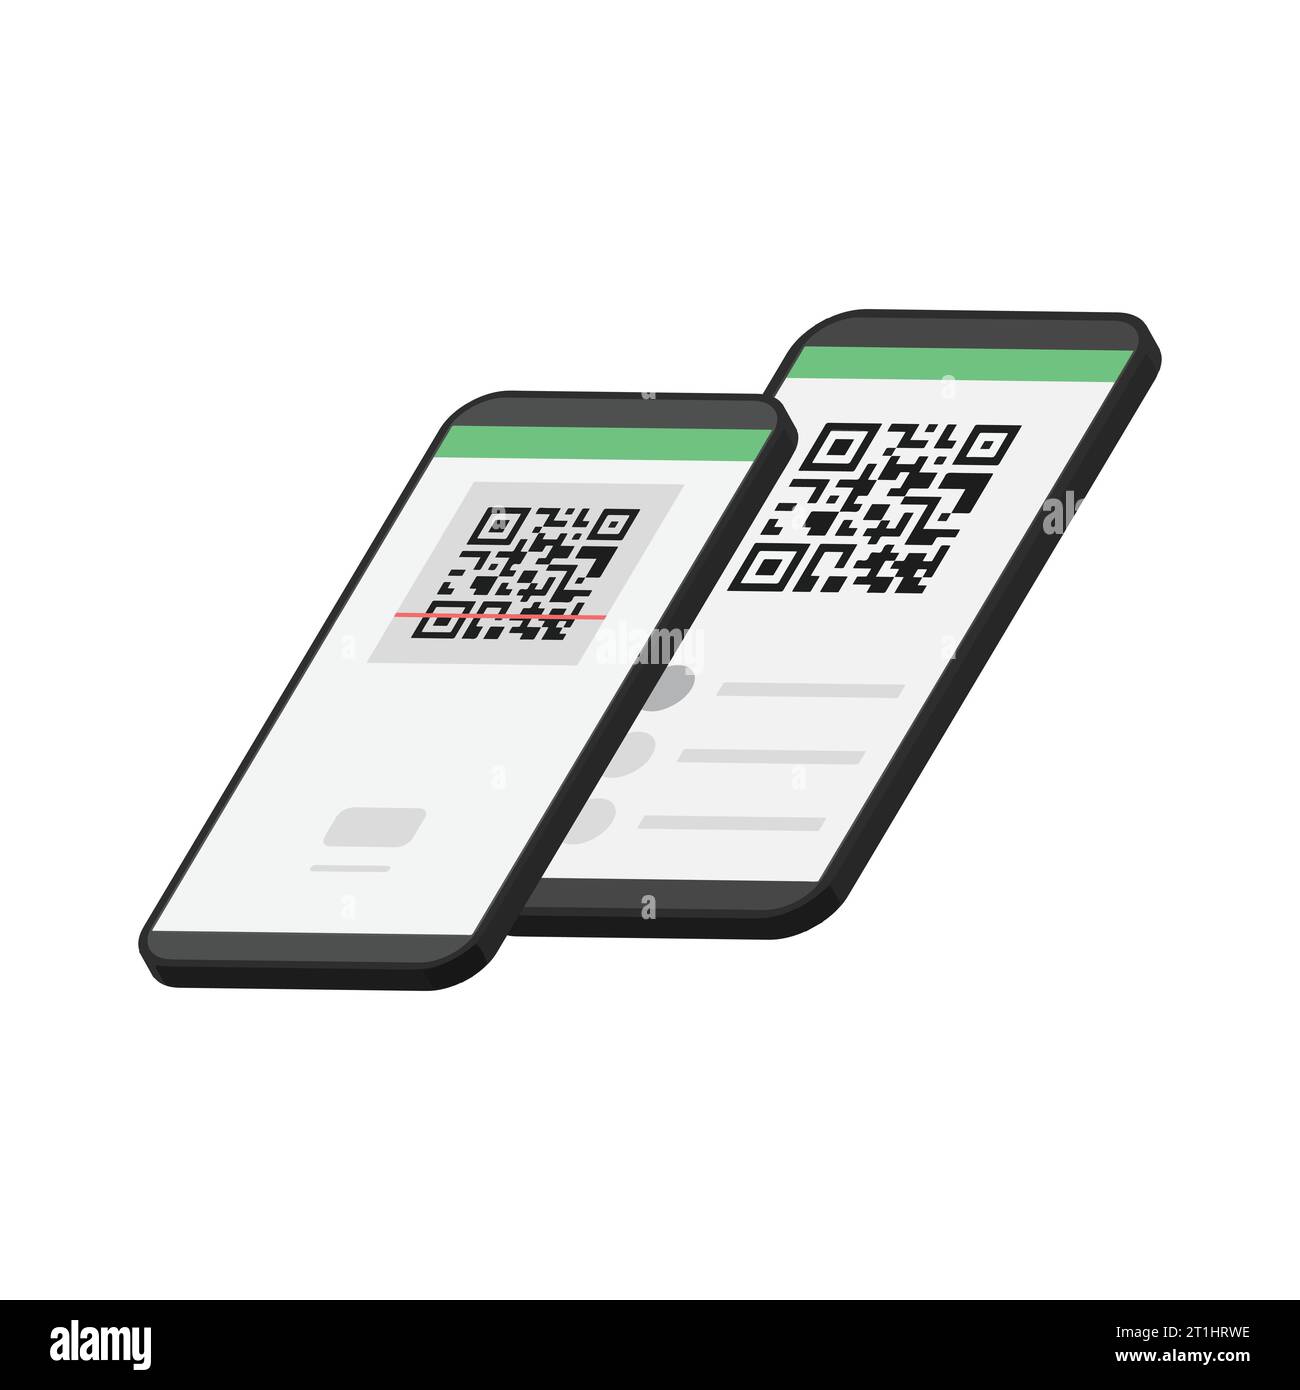 Contactless payment by scan qr code vector illustration Stock Vector